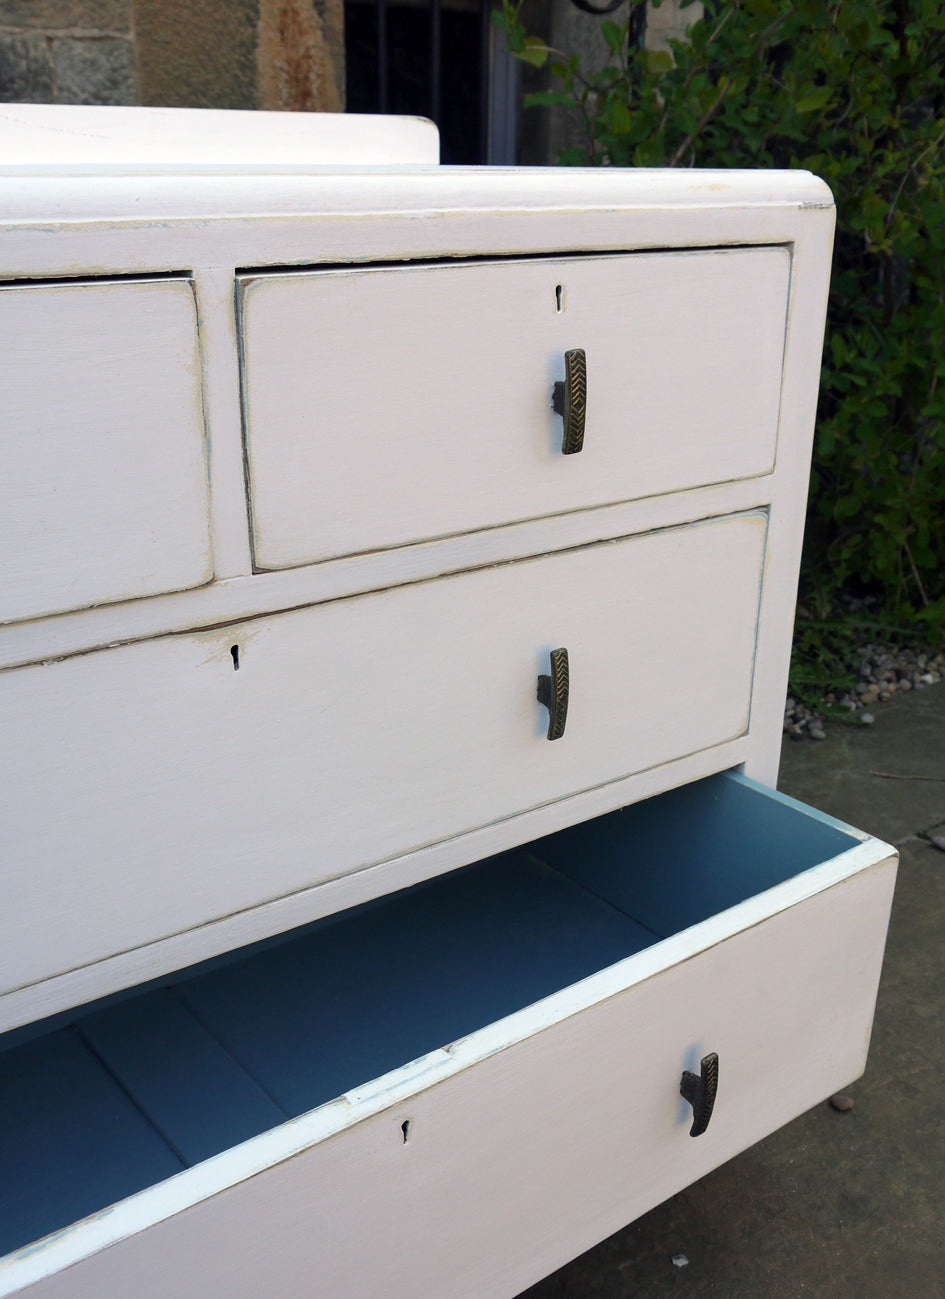 hand painted chest of drawers in fusion picket fence